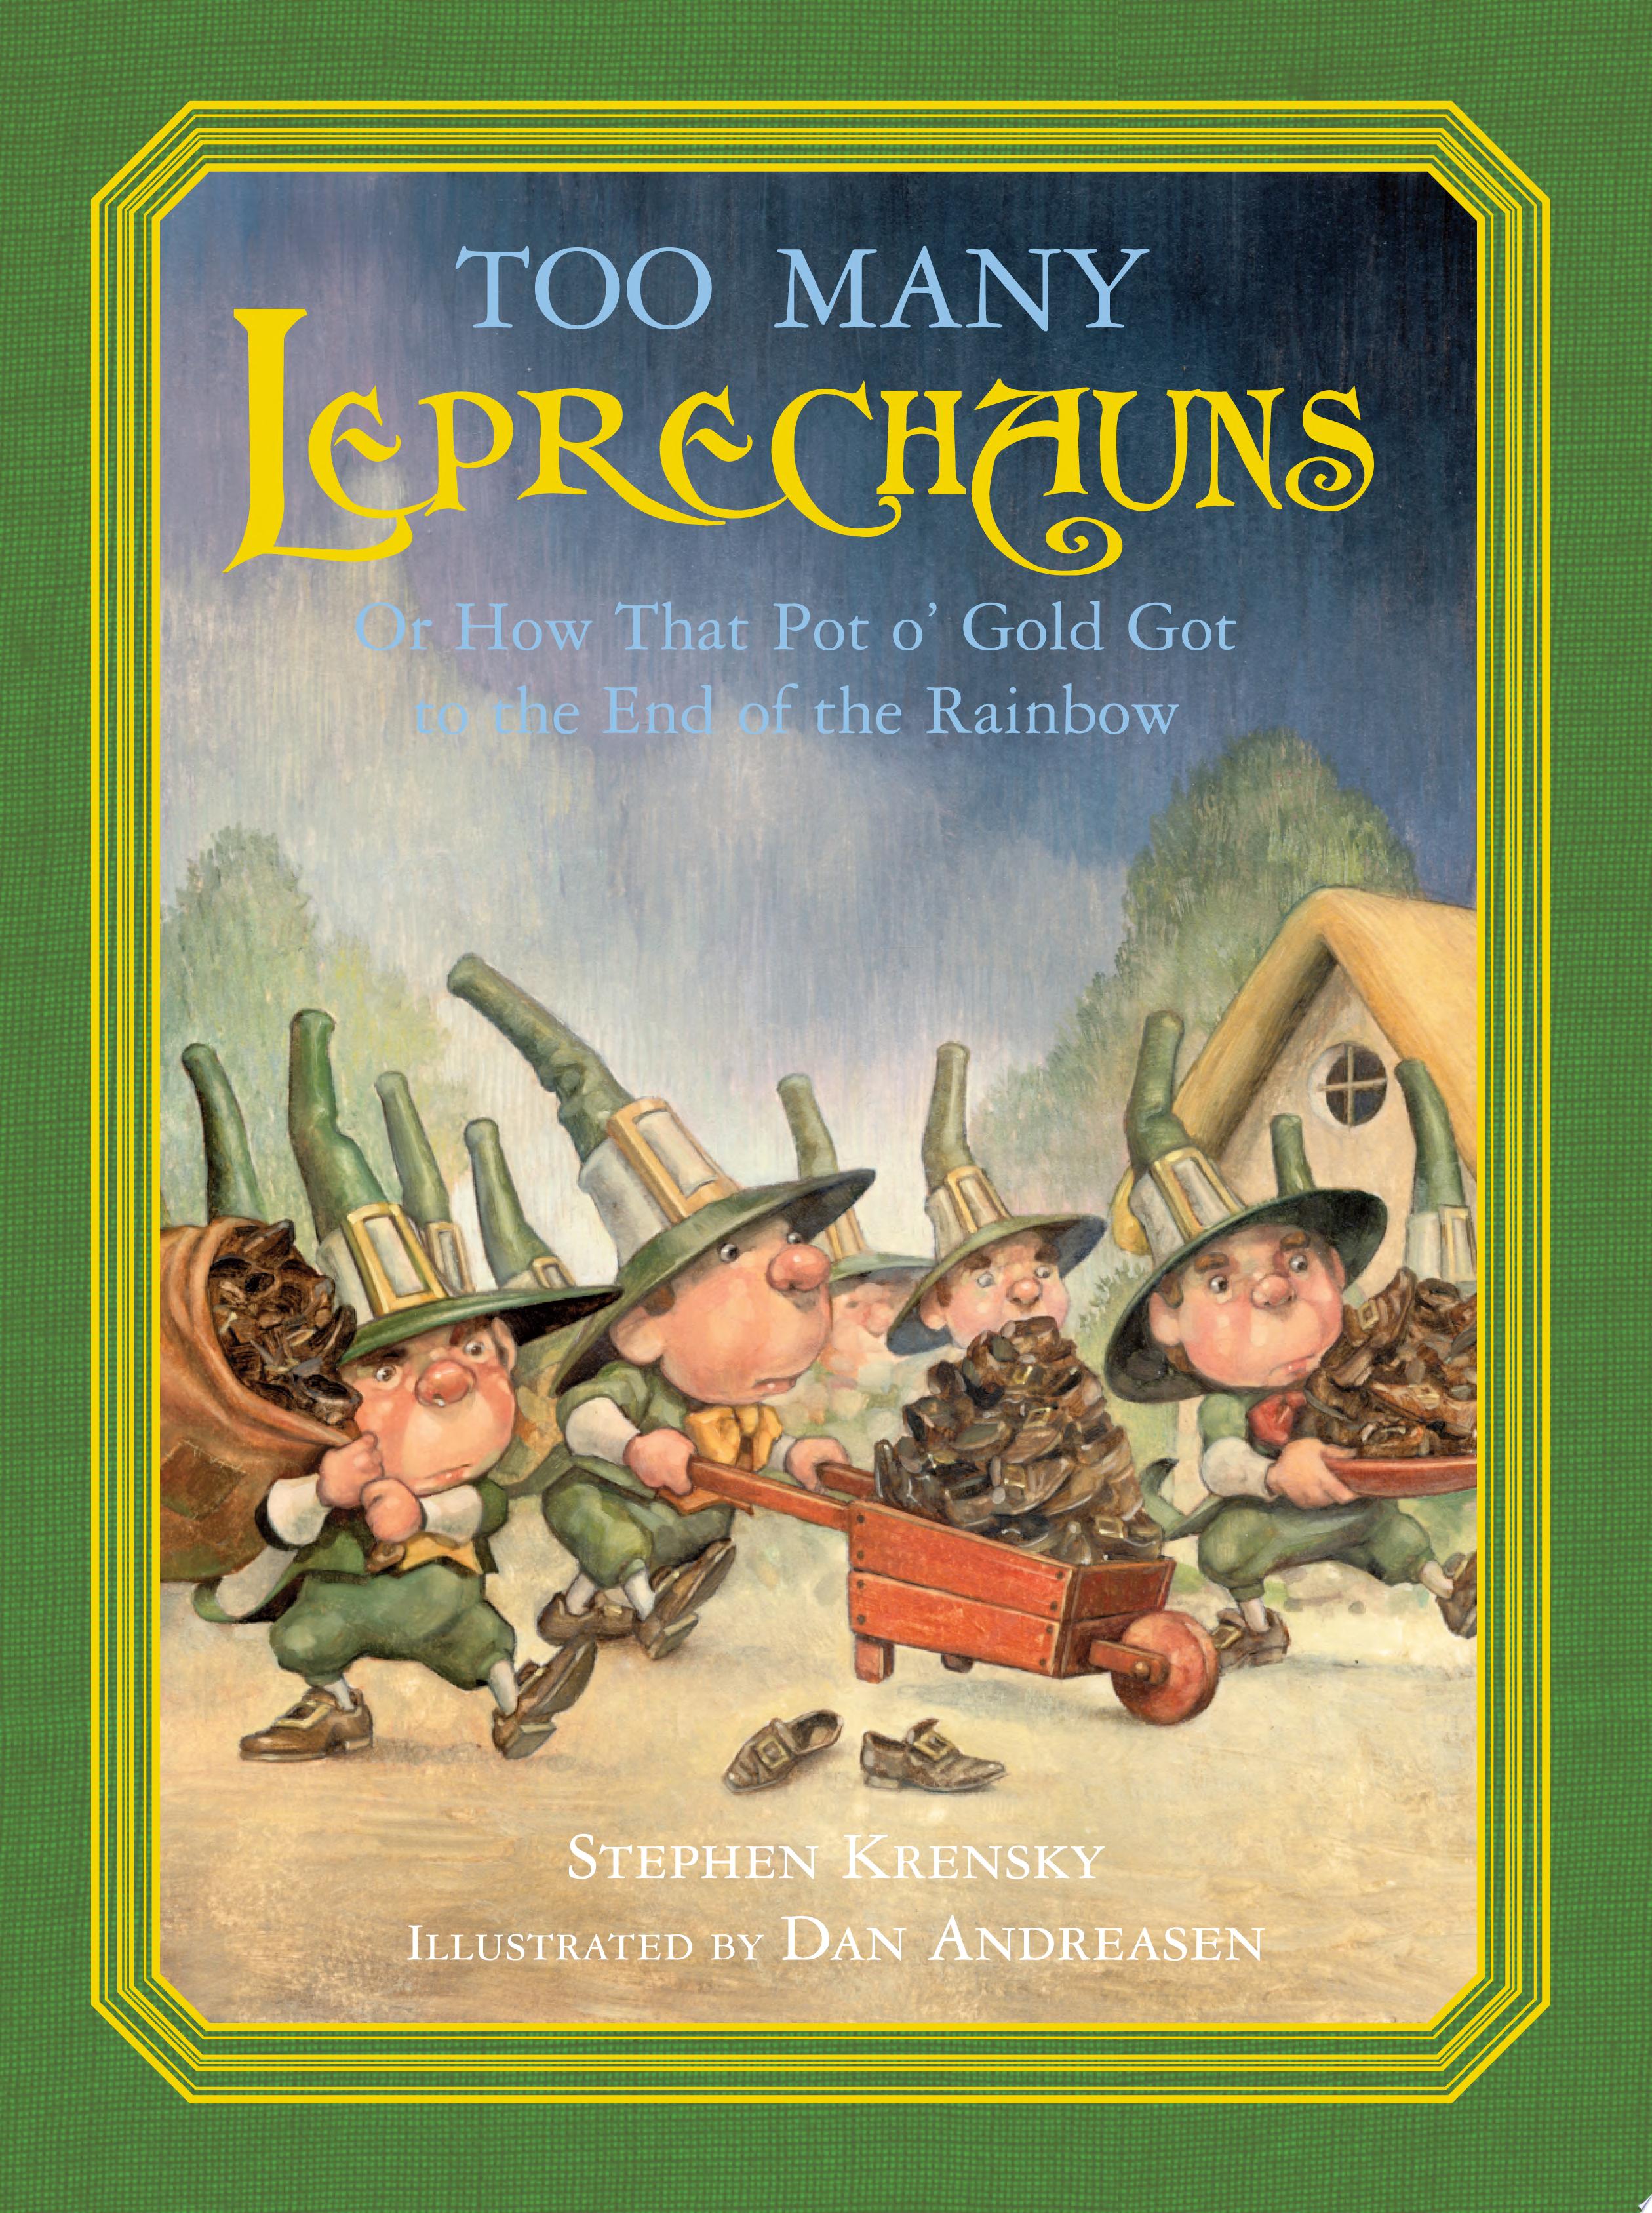 Image for "Too Many Leprechauns"